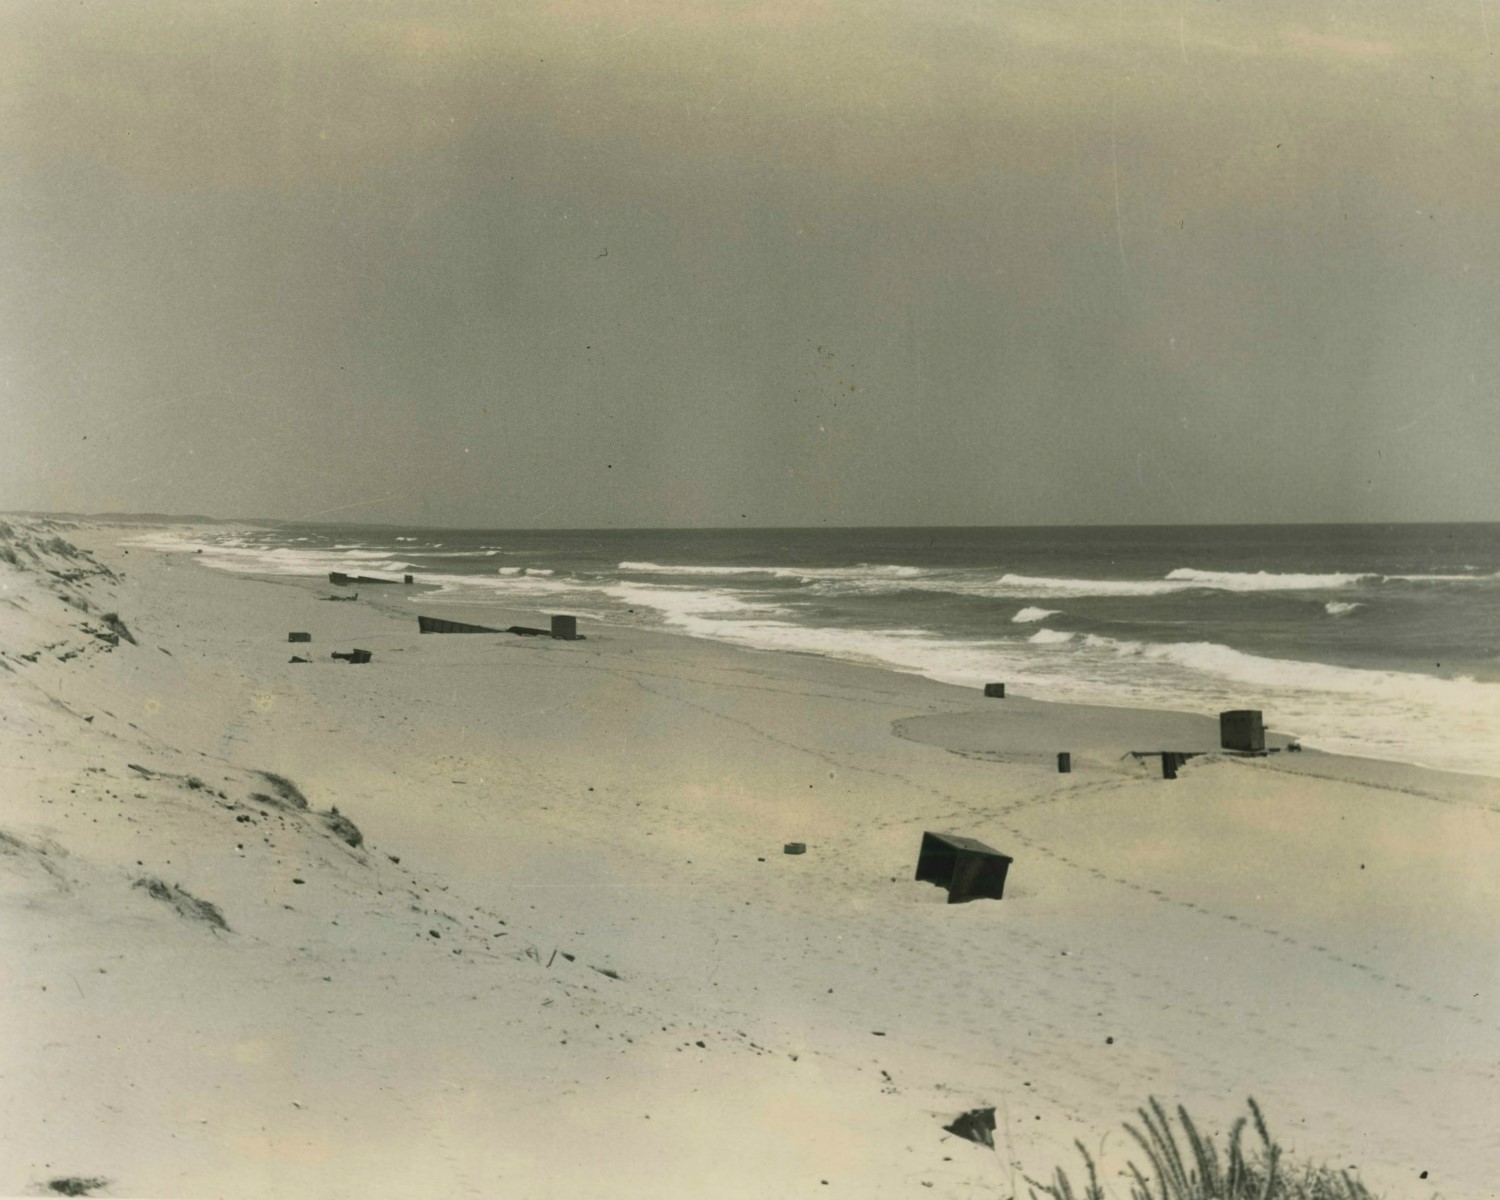  Mehdia - General view of "Blue Beach" showing wreckage of landing boats near Mehdia Plage -US Army Photograph label